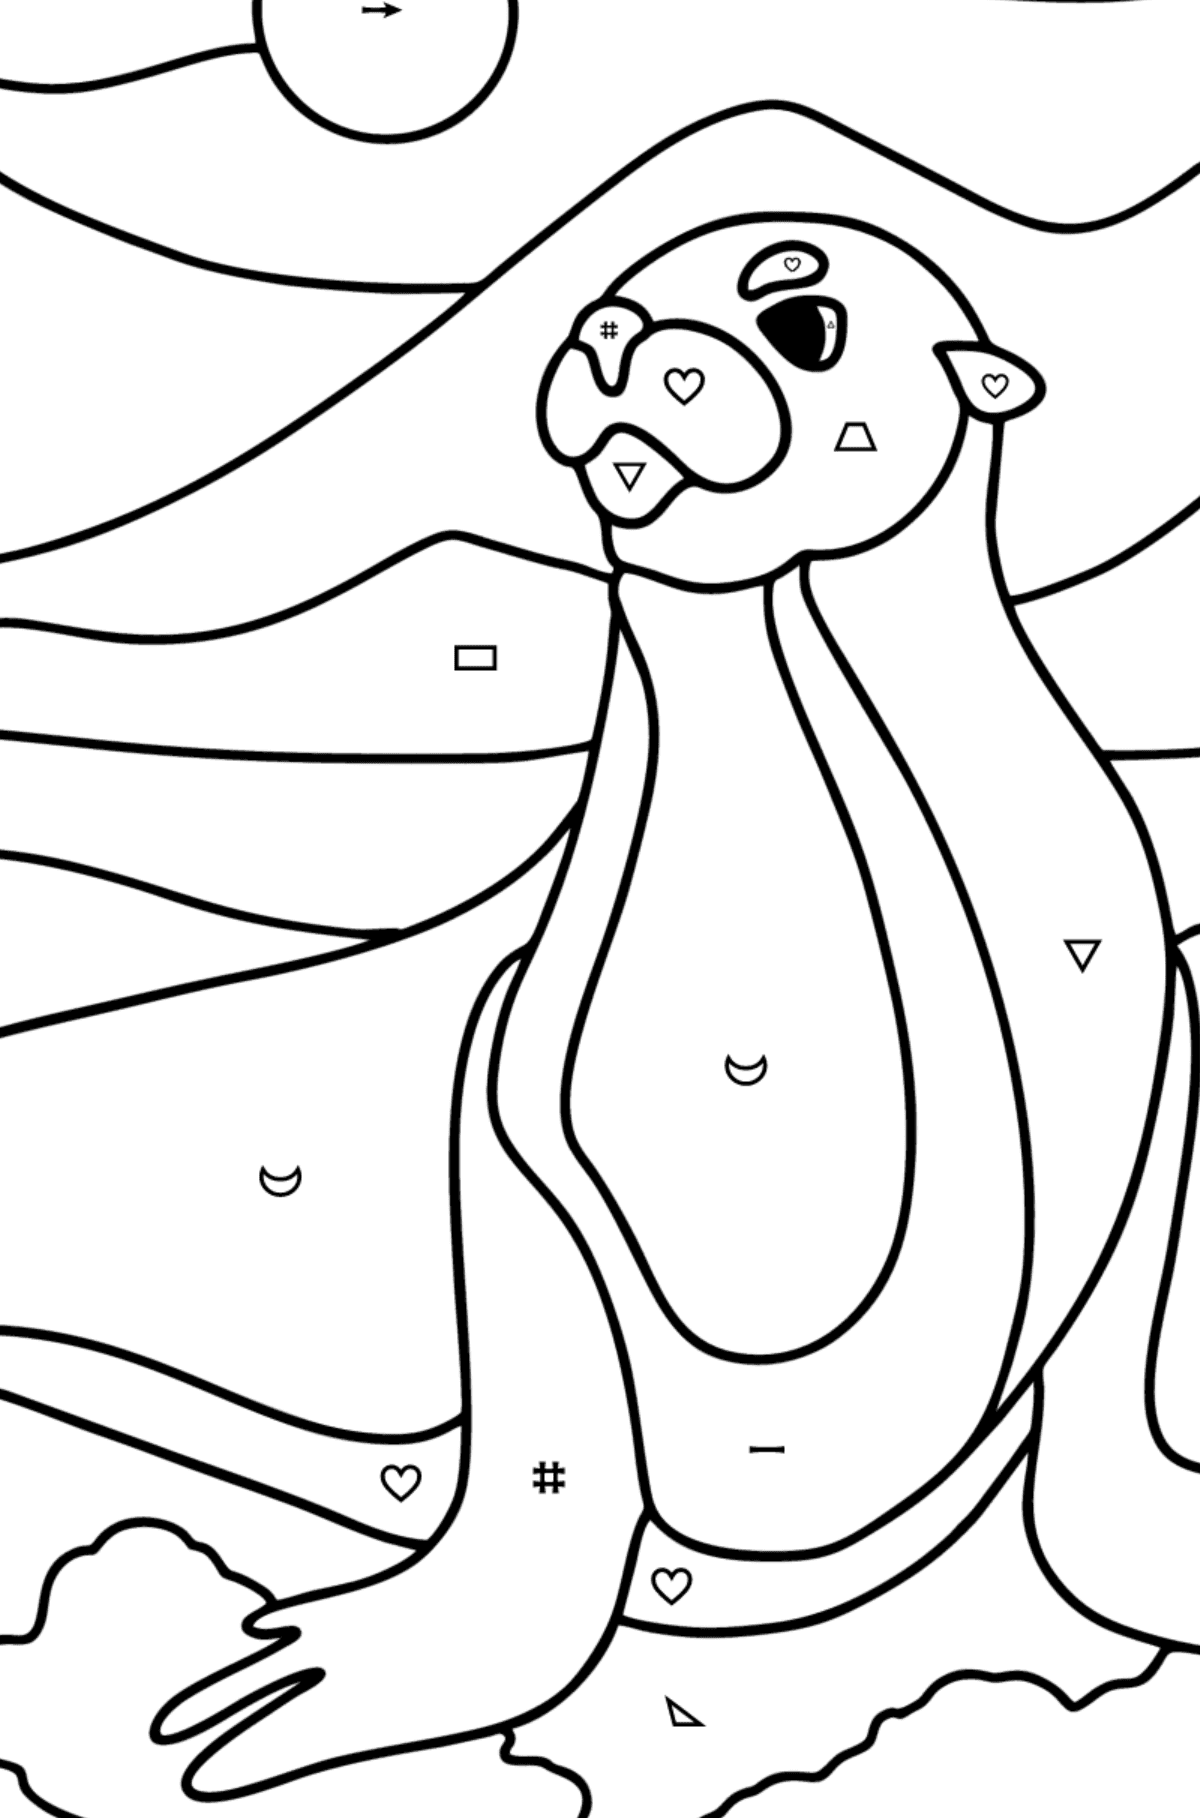 Sea lion coloring page - Coloring by Symbols and Geometric Shapes for Kids